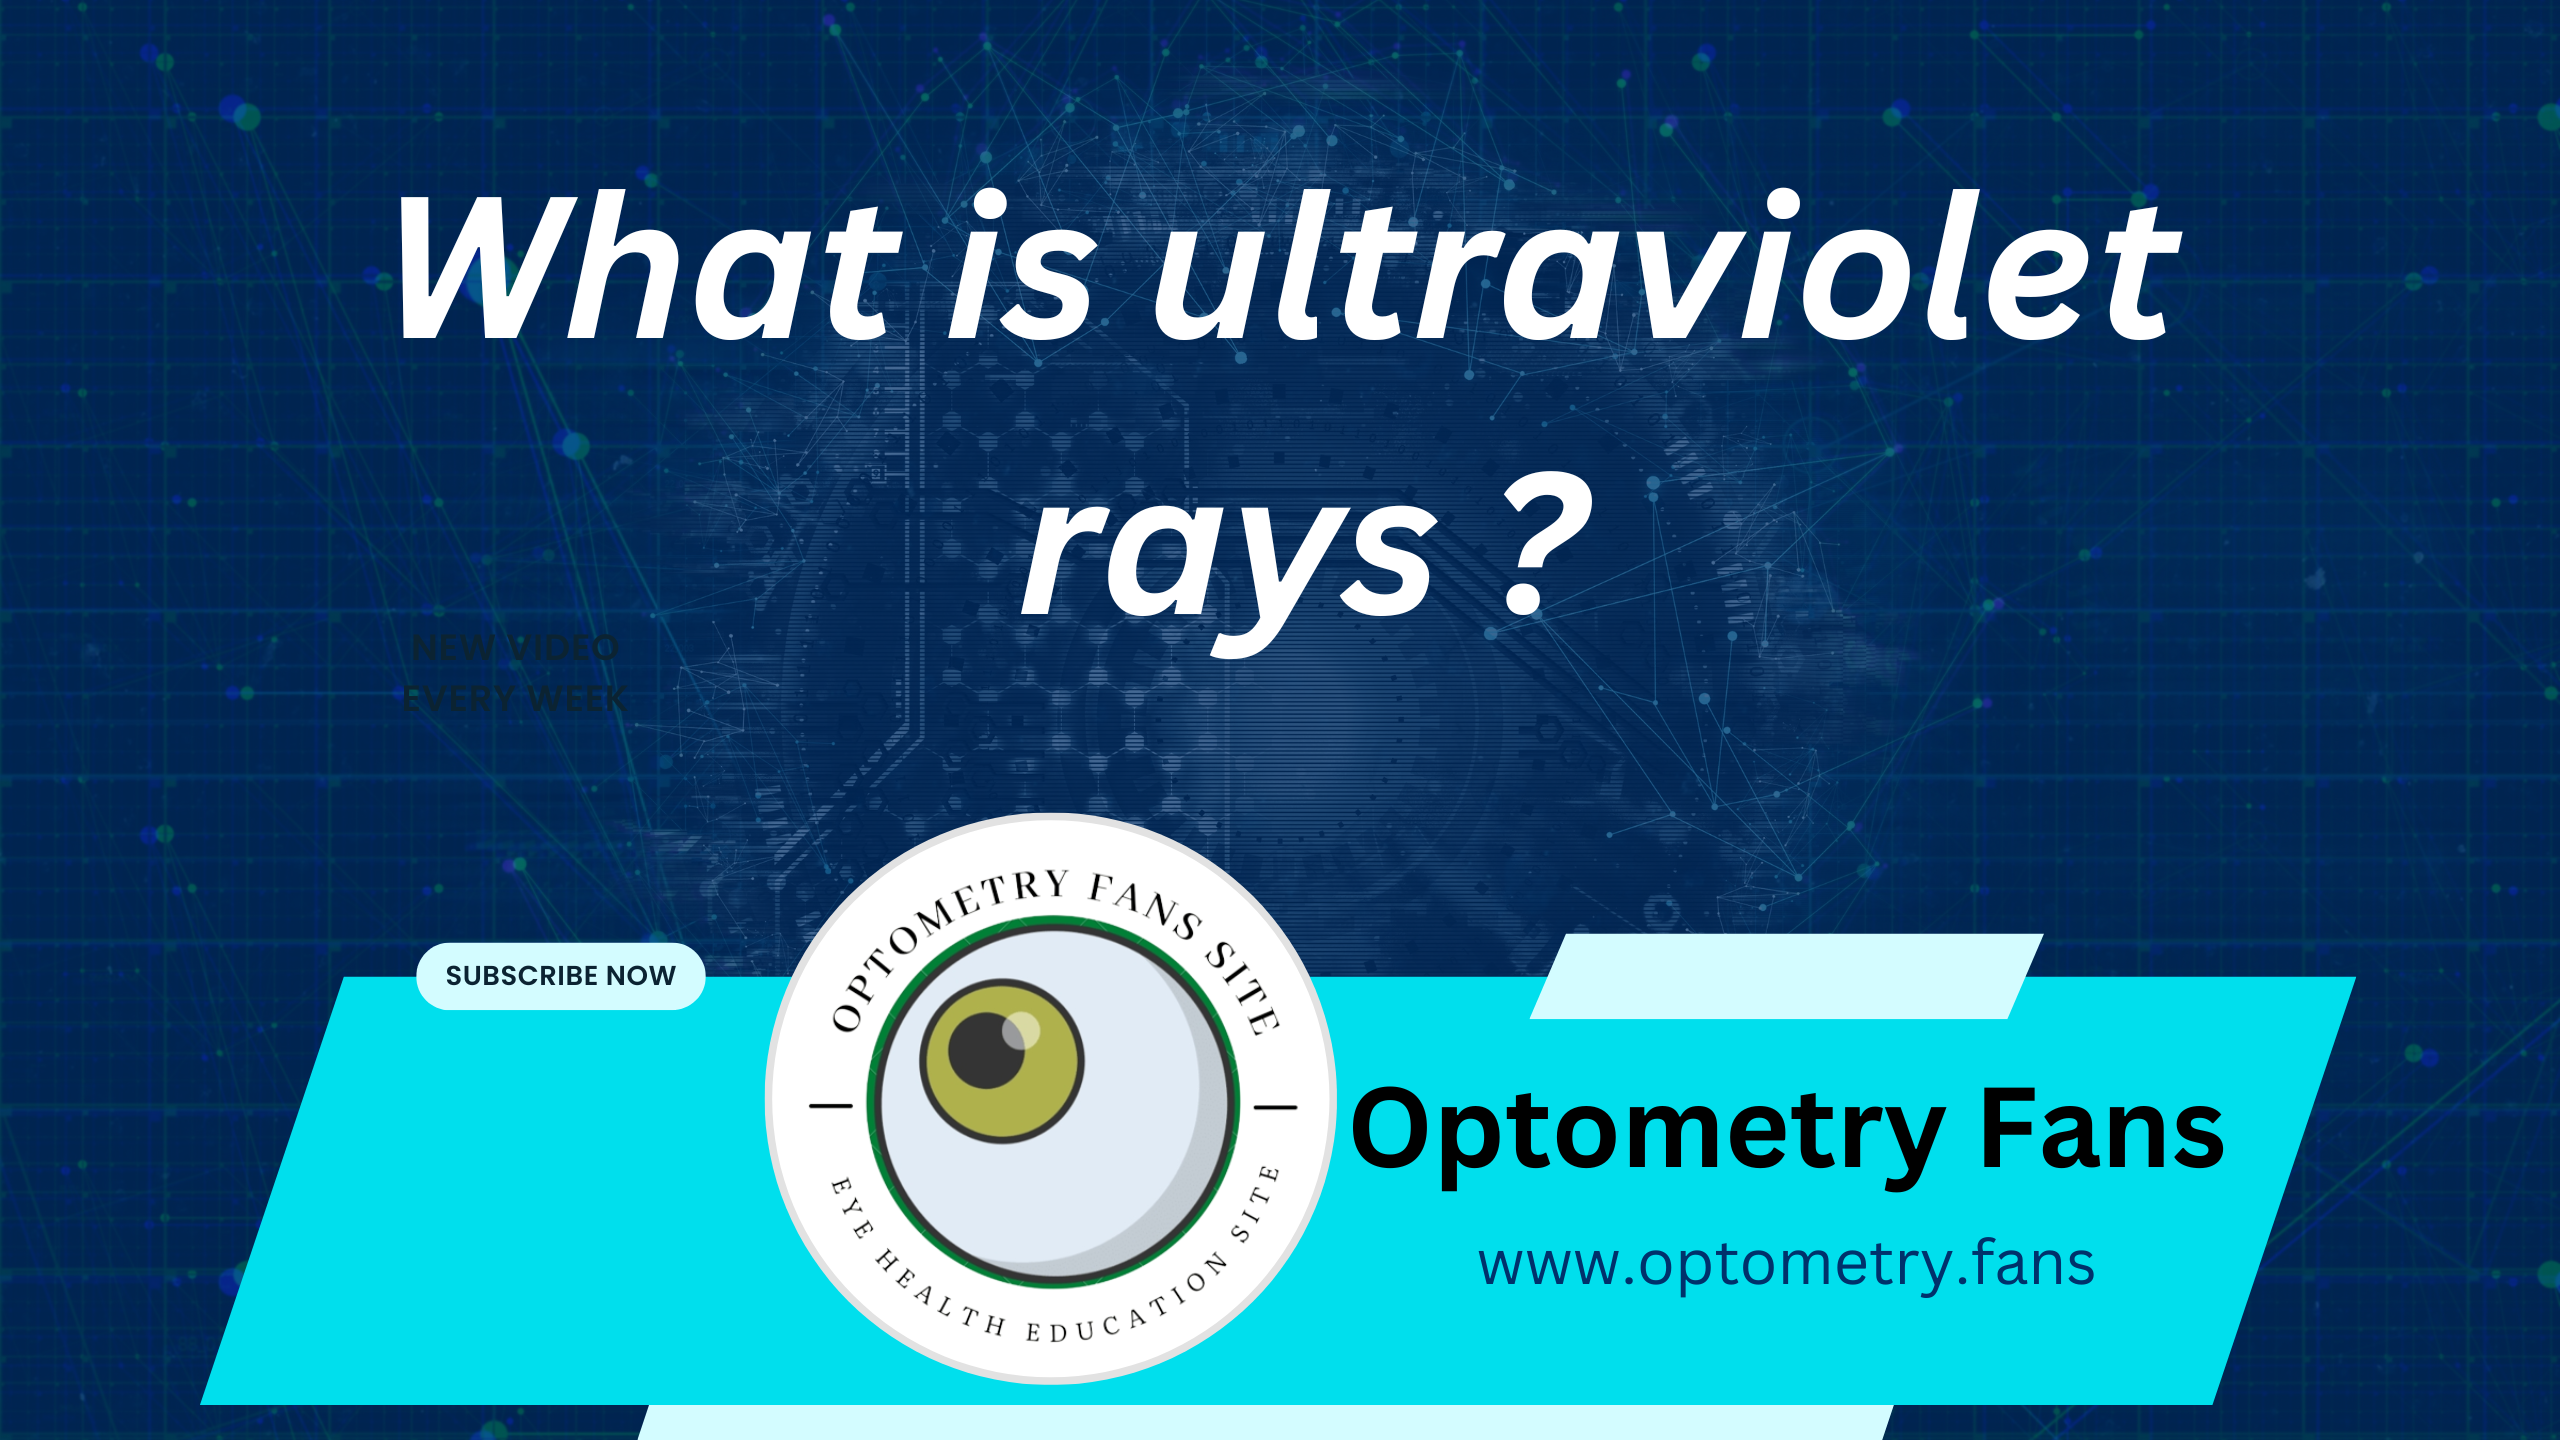 What is ultraviolet rays ?